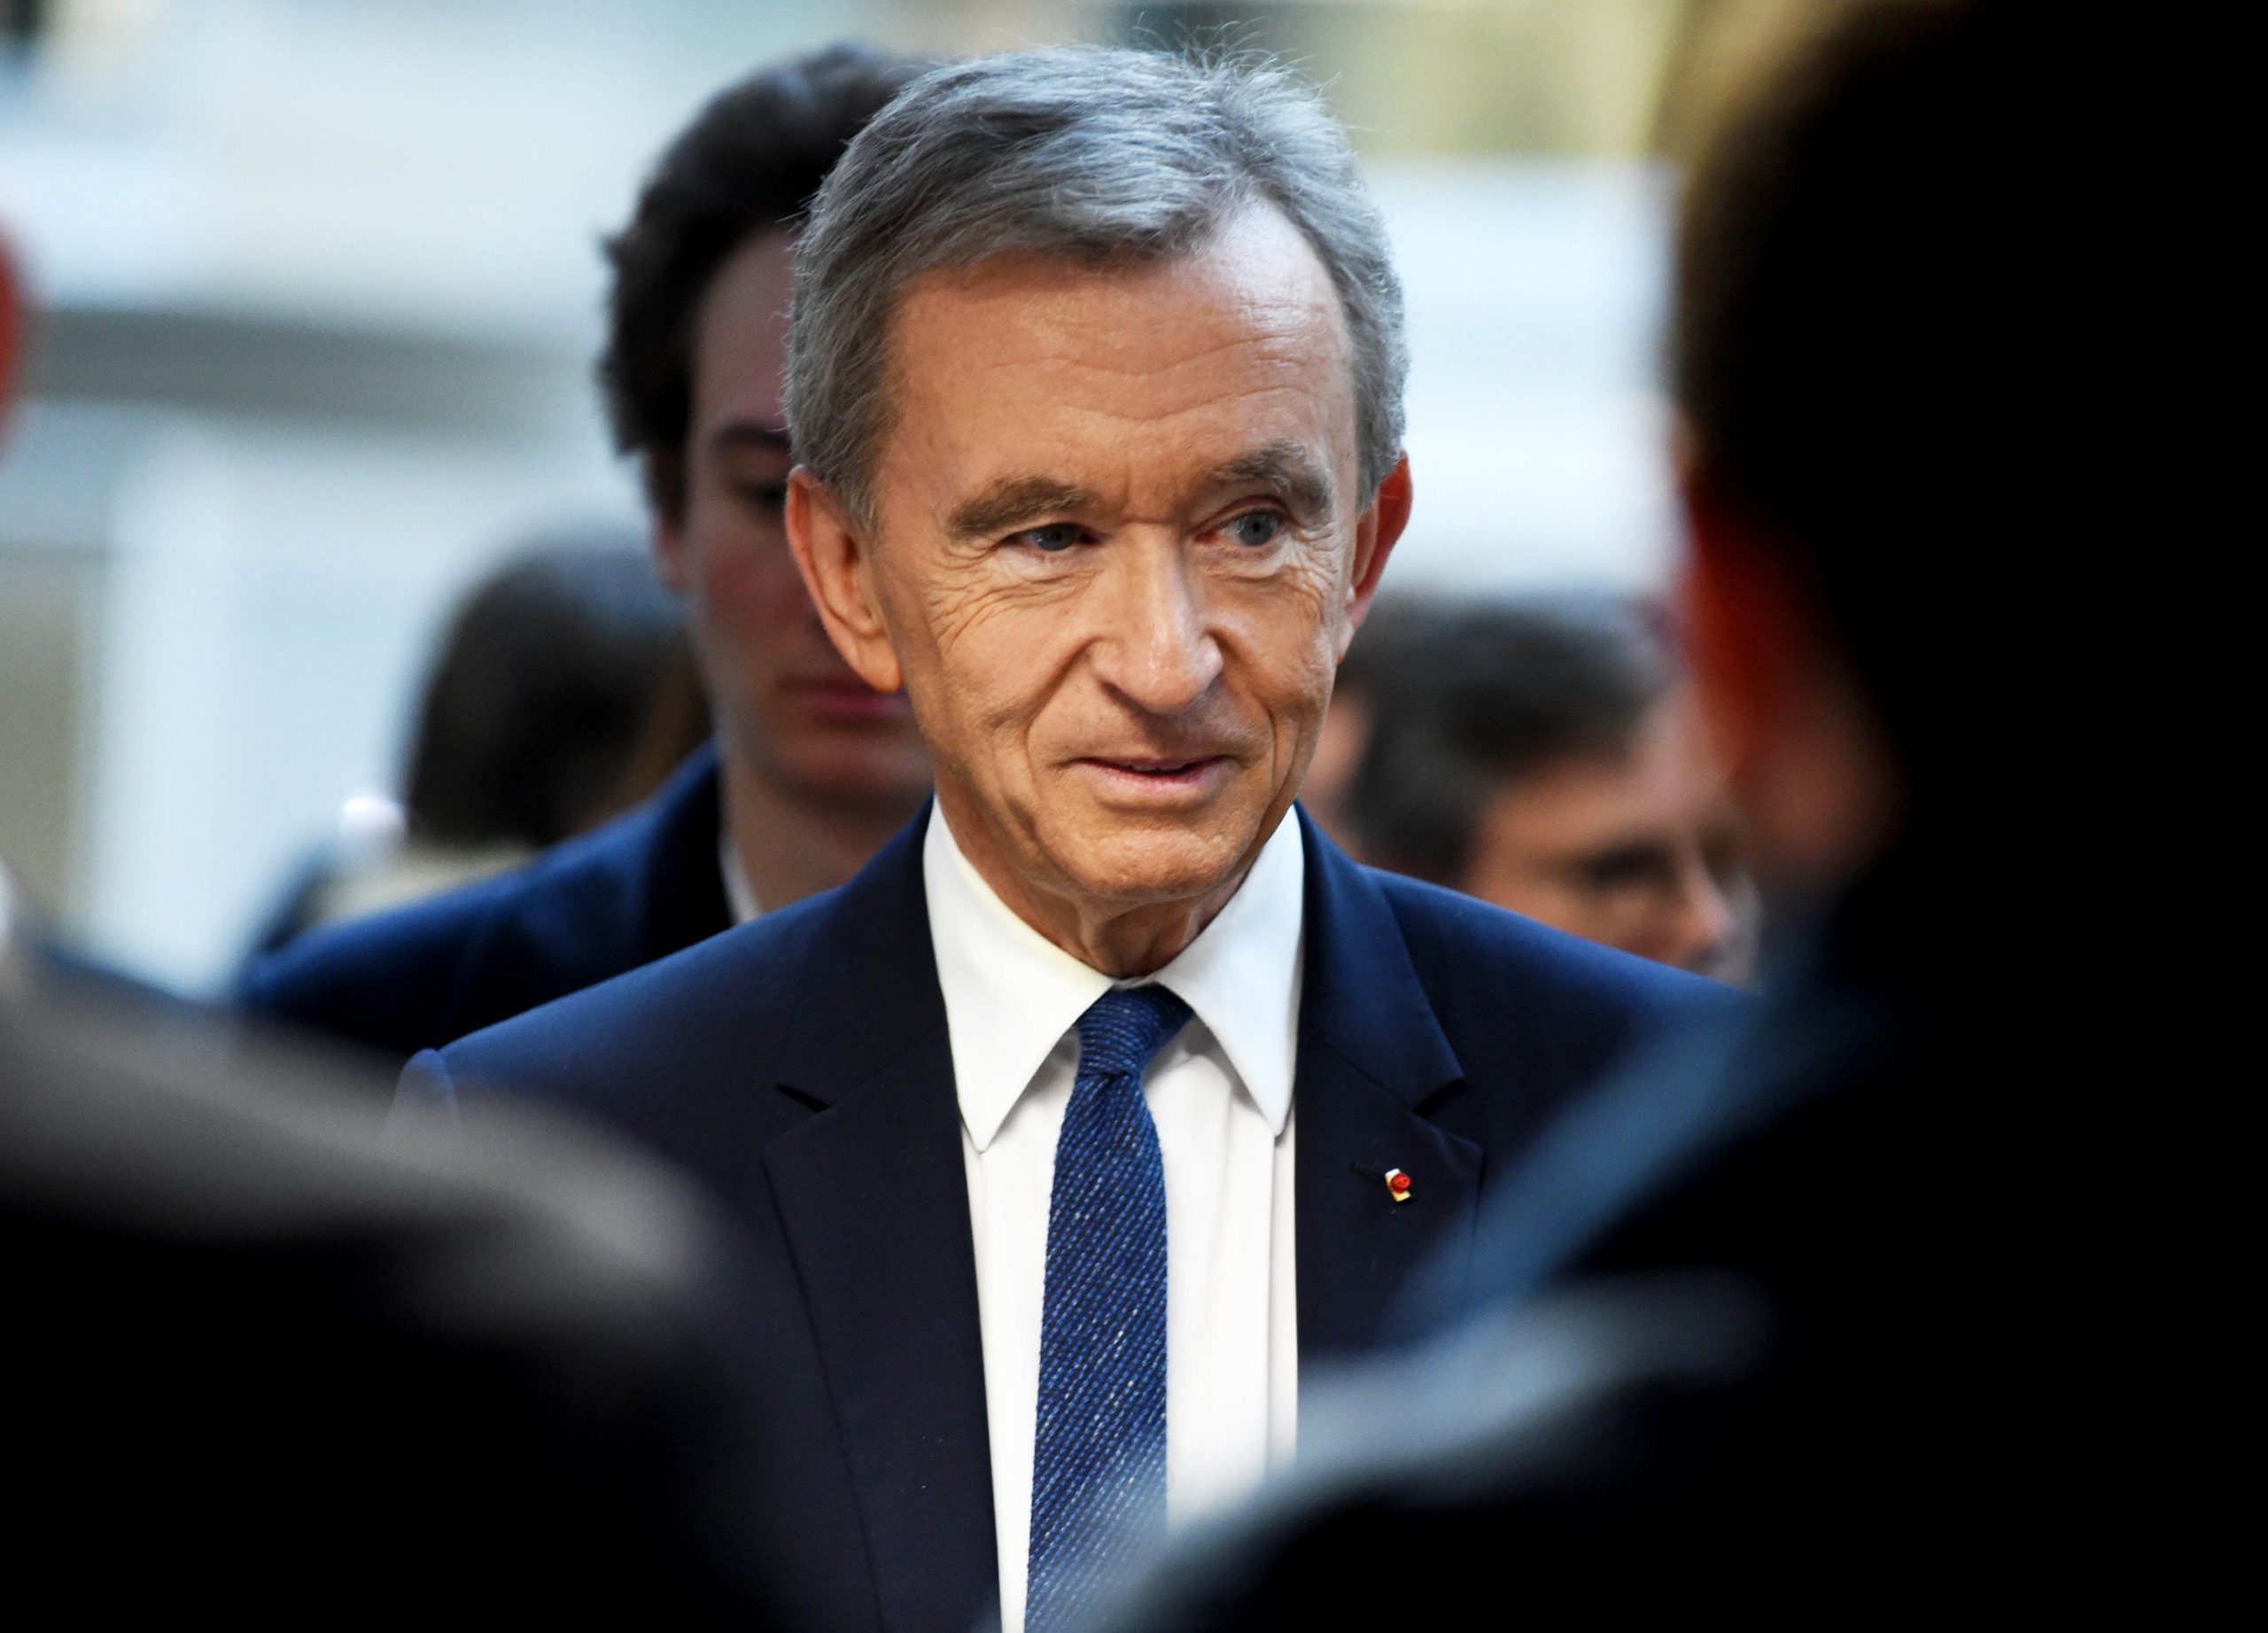 LVMH CEO Bernard Arnault is Now the World's Second-Richest Person